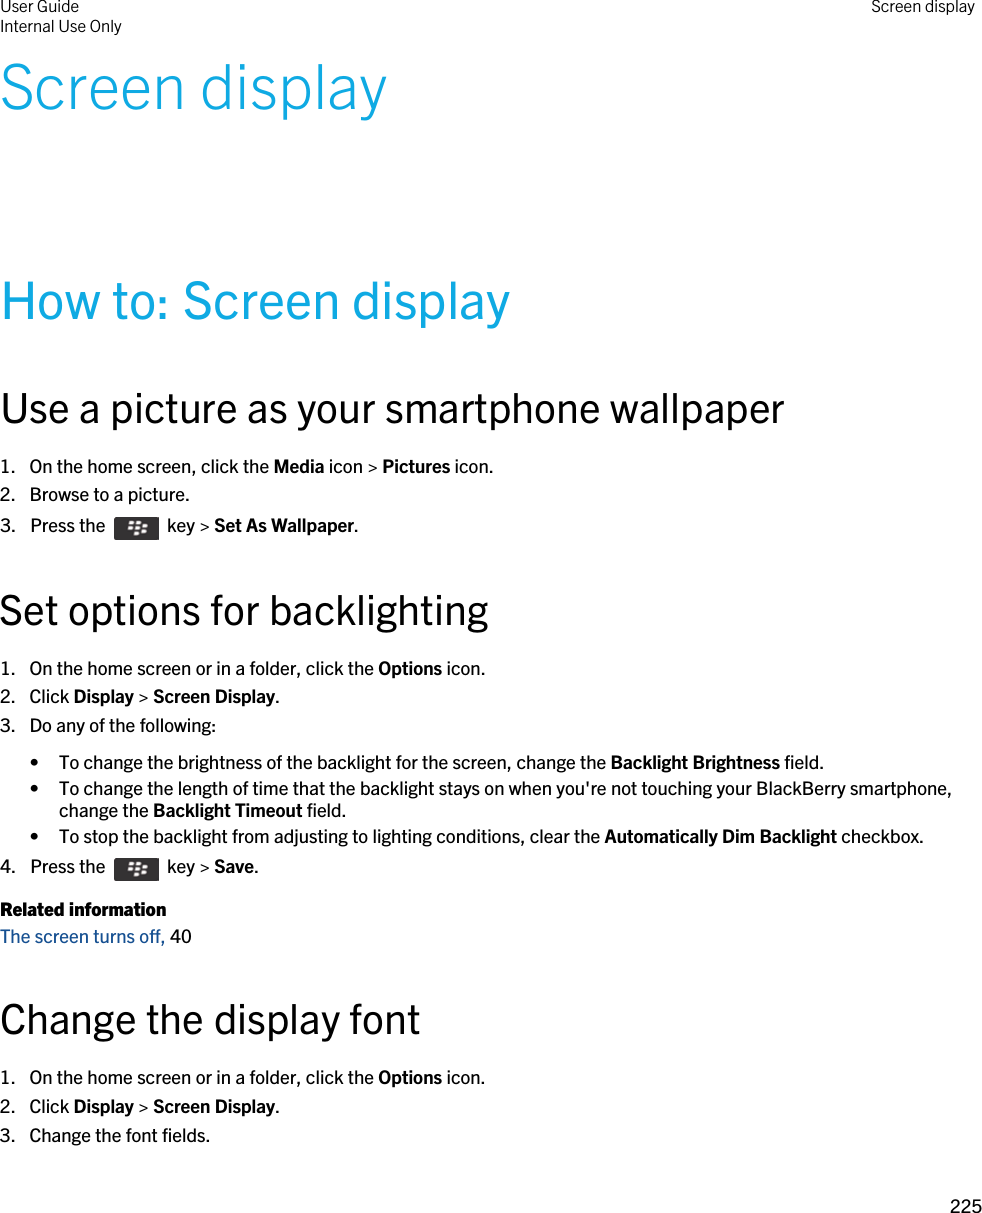 Screen displayHow to: Screen displayUse a picture as your smartphone wallpaper1. On the home screen, click the Media icon &gt; Pictures icon.2. Browse to a picture.3.  Press the    key &gt; Set As Wallpaper. Set options for backlighting1. On the home screen or in a folder, click the Options icon.2. Click Display &gt; Screen Display.3. Do any of the following:• To change the brightness of the backlight for the screen, change the Backlight Brightness field.• To change the length of time that the backlight stays on when you&apos;re not touching your BlackBerry smartphone, change the Backlight Timeout field.• To stop the backlight from adjusting to lighting conditions, clear the Automatically Dim Backlight checkbox.4.  Press the    key &gt; Save. Related informationThe screen turns off, 40 Change the display font1. On the home screen or in a folder, click the Options icon.2. Click Display &gt; Screen Display.3. Change the font fields.User GuideInternal Use Only Screen display225 